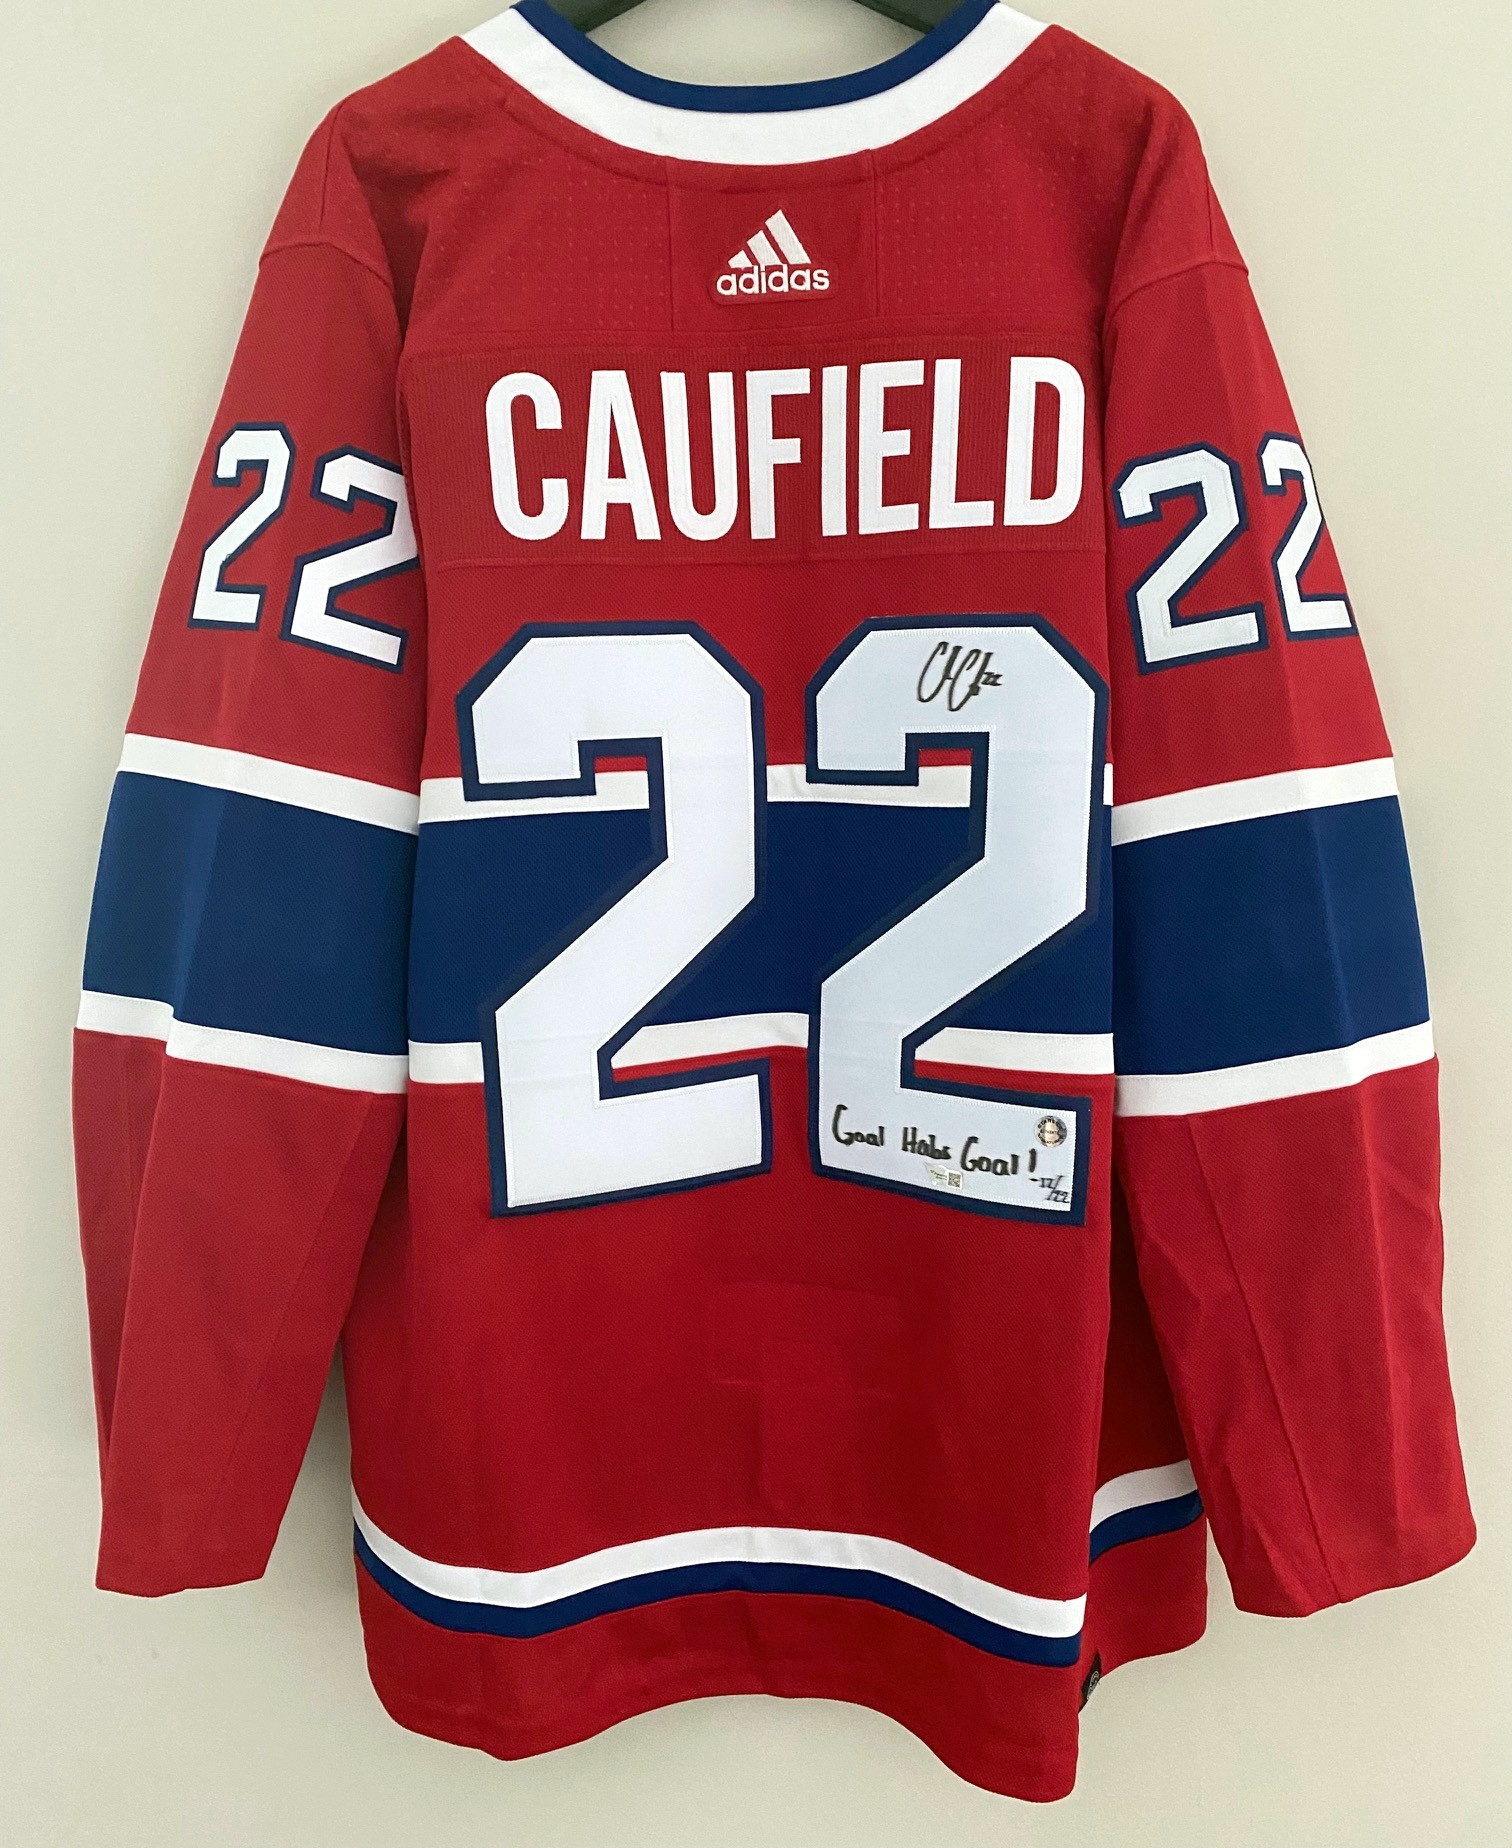 Cole Caufield Montreal Canadiens Signed Adidas Jersey with Goal Habs Goal! Note #12/22 - Fanatics